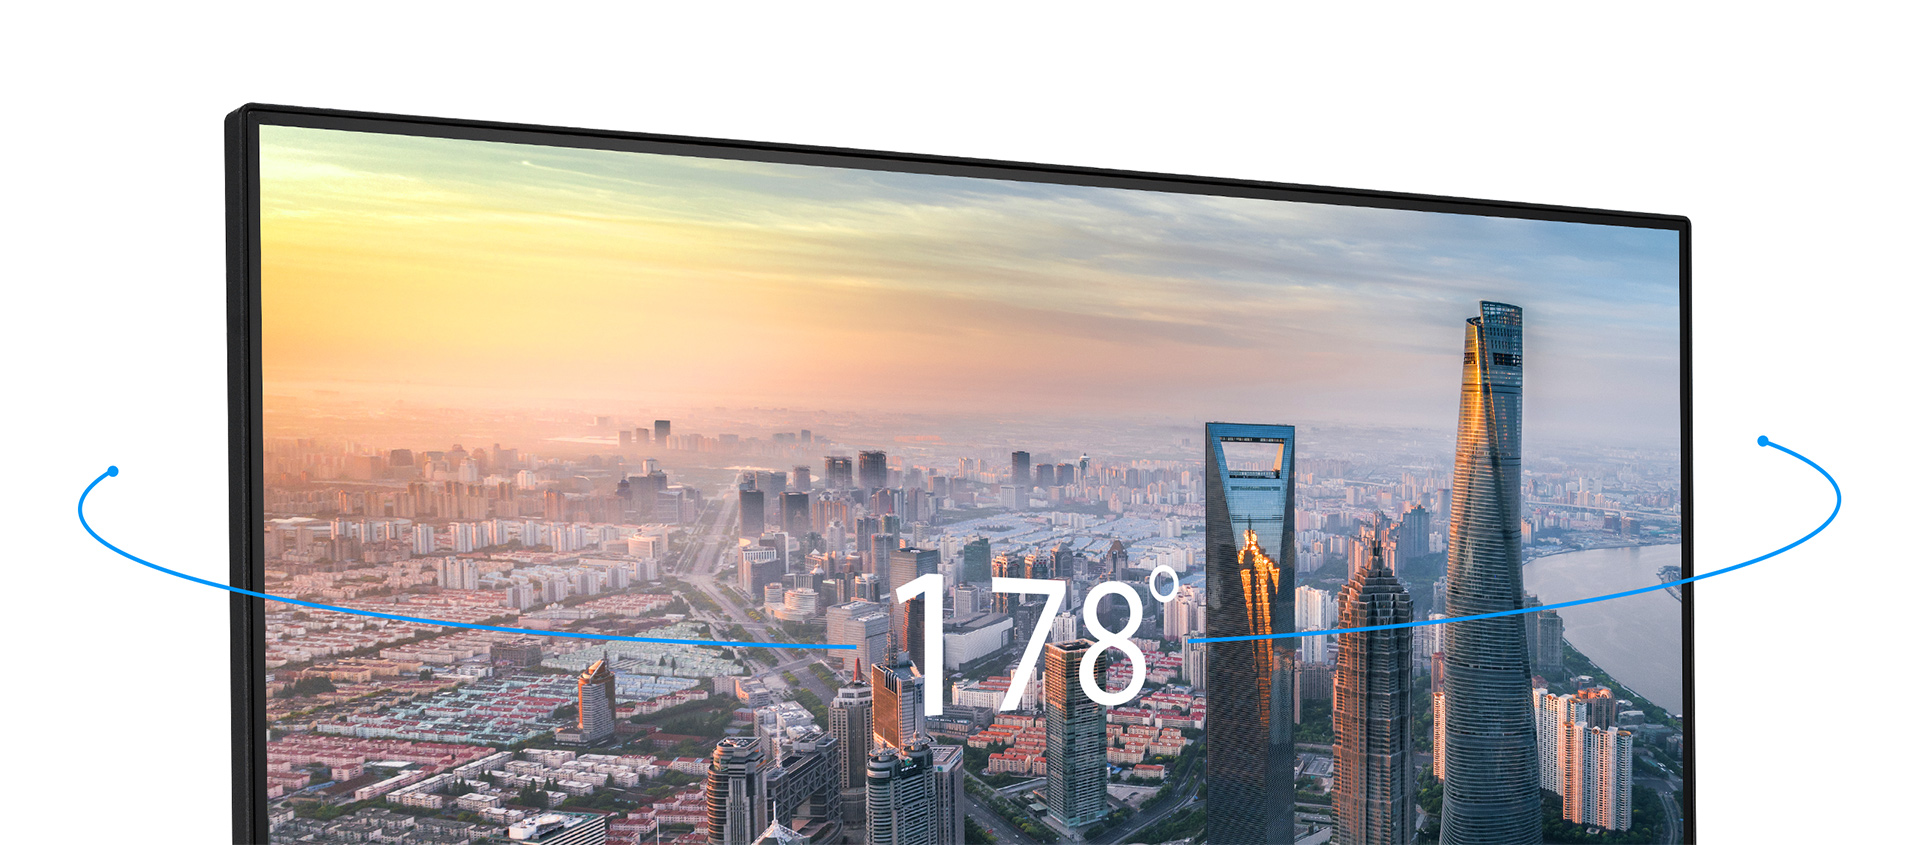 The IPS panel has a 178-degree viewing angle.